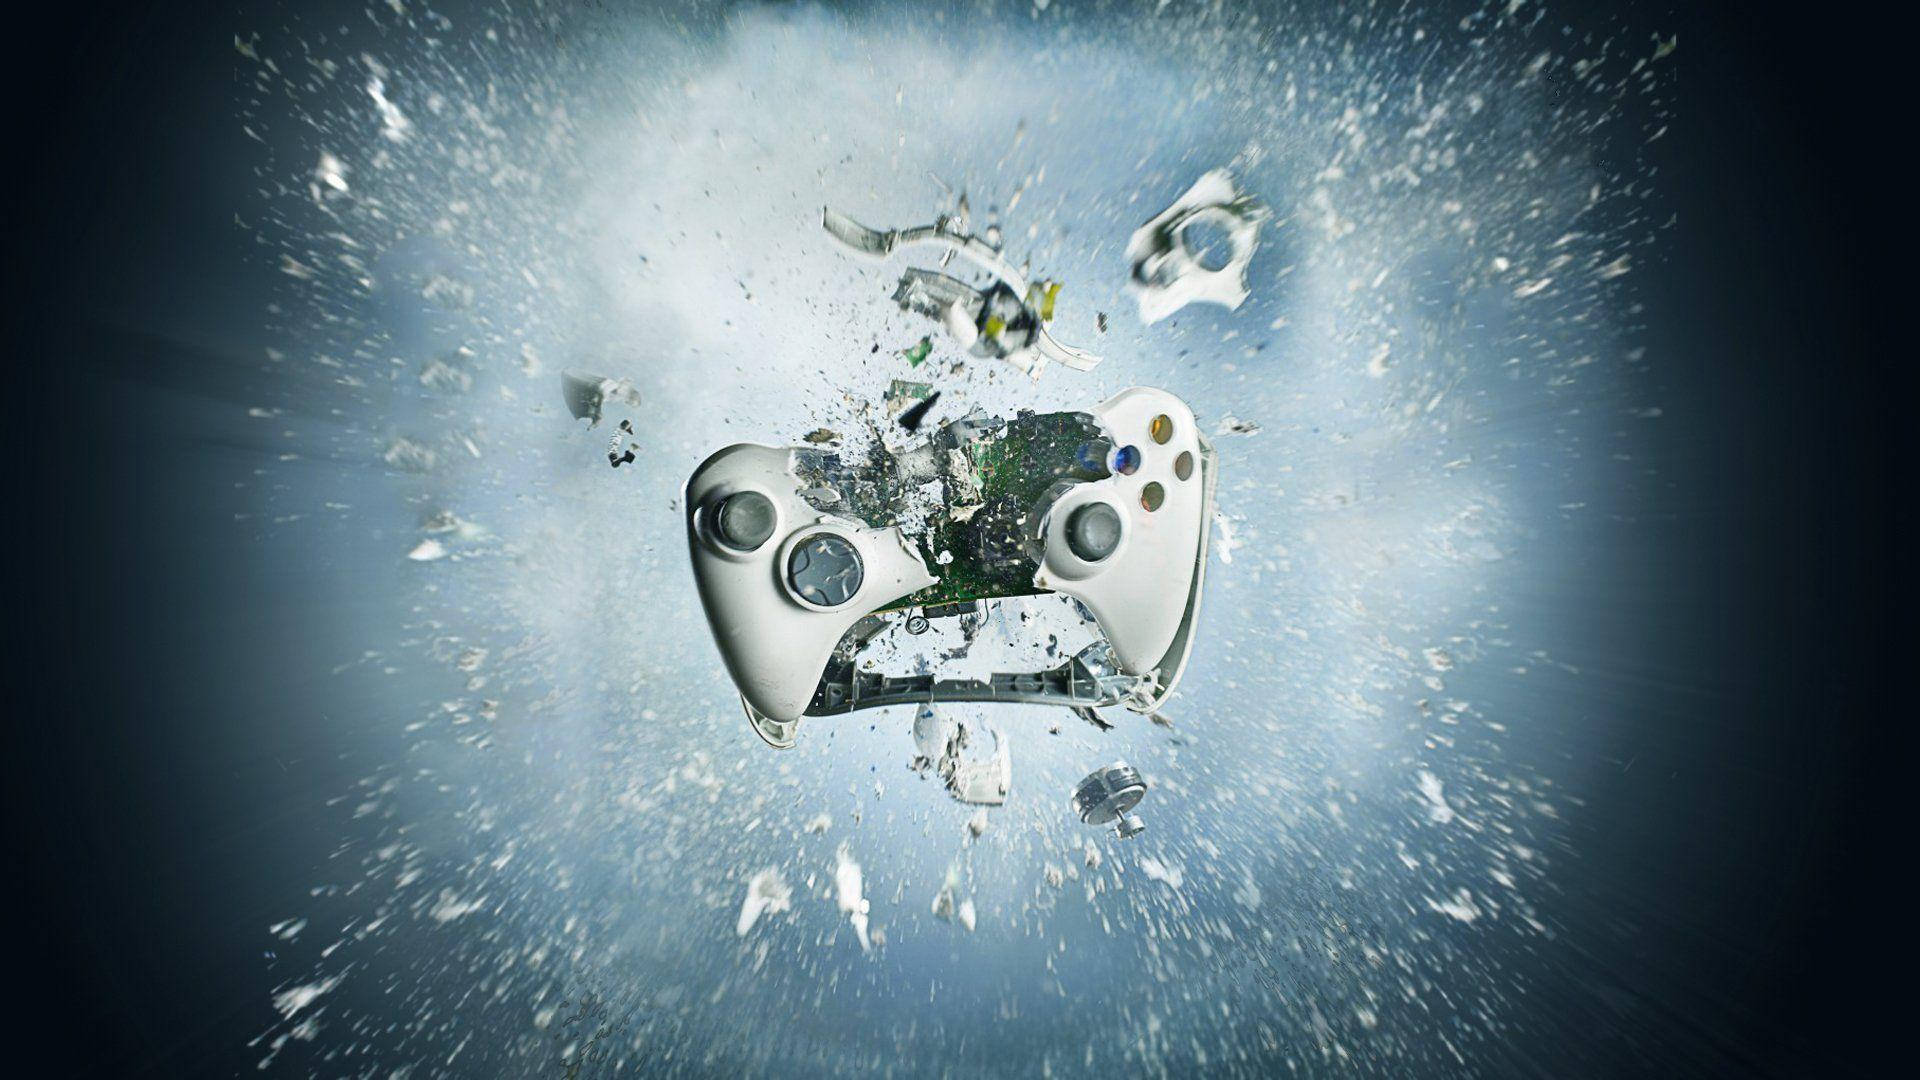 Xbox One X Controller Explosion Wallpaper